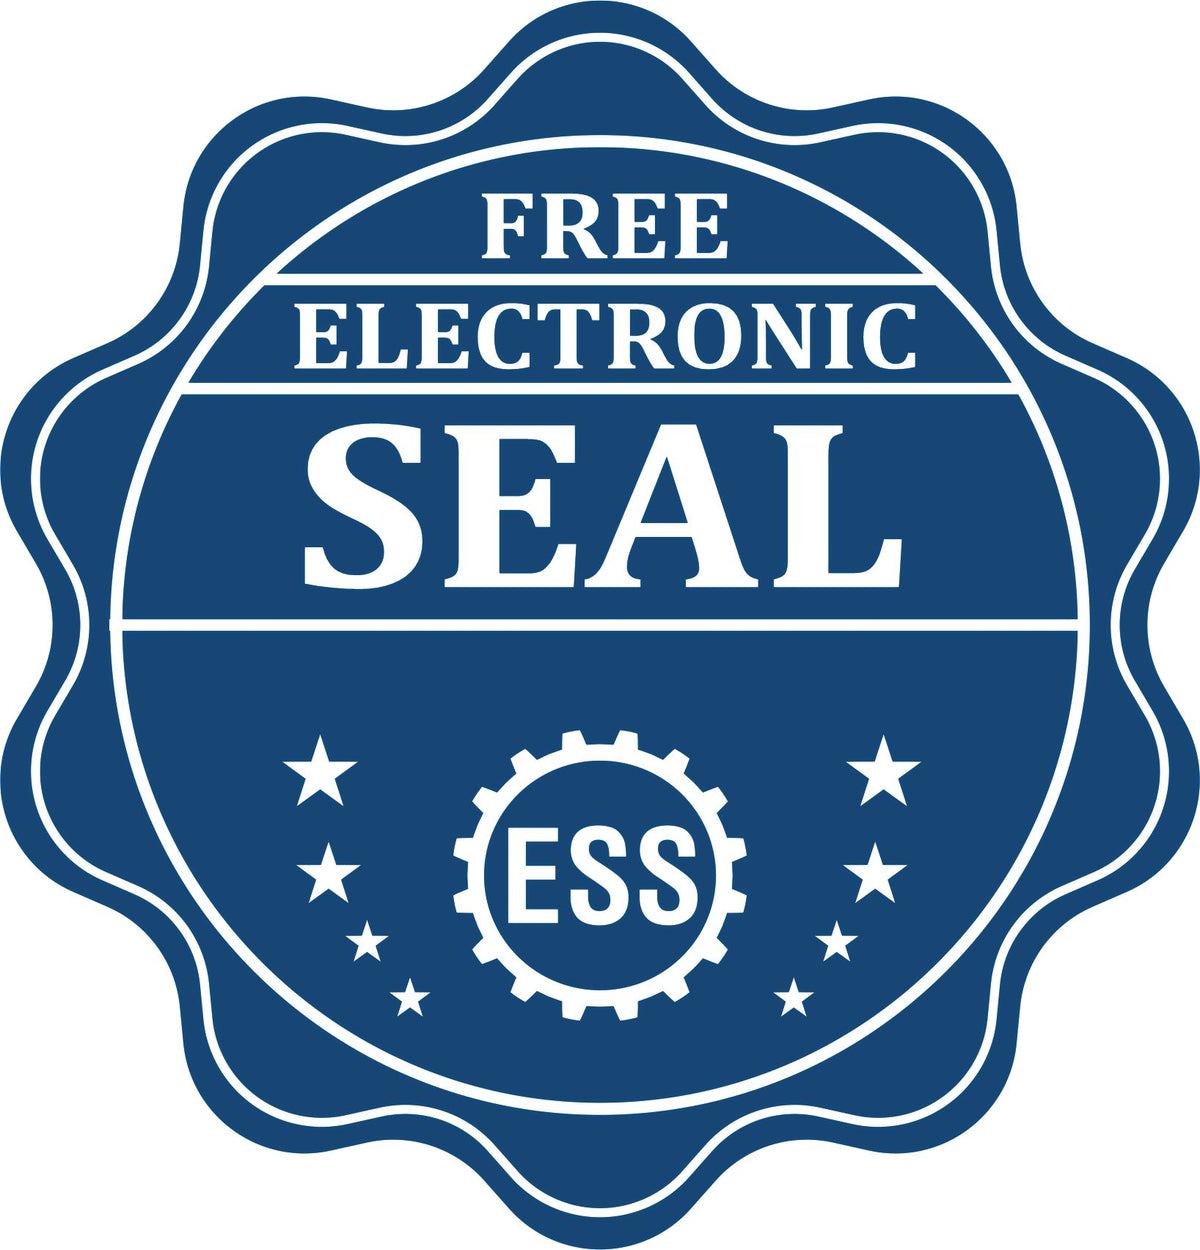 A badge showing a free electronic seal for the MaxLight Premium Pre-Inked Rhode Island Rectangular Notarial Stamp with stars and the ESS gear on the emblem.